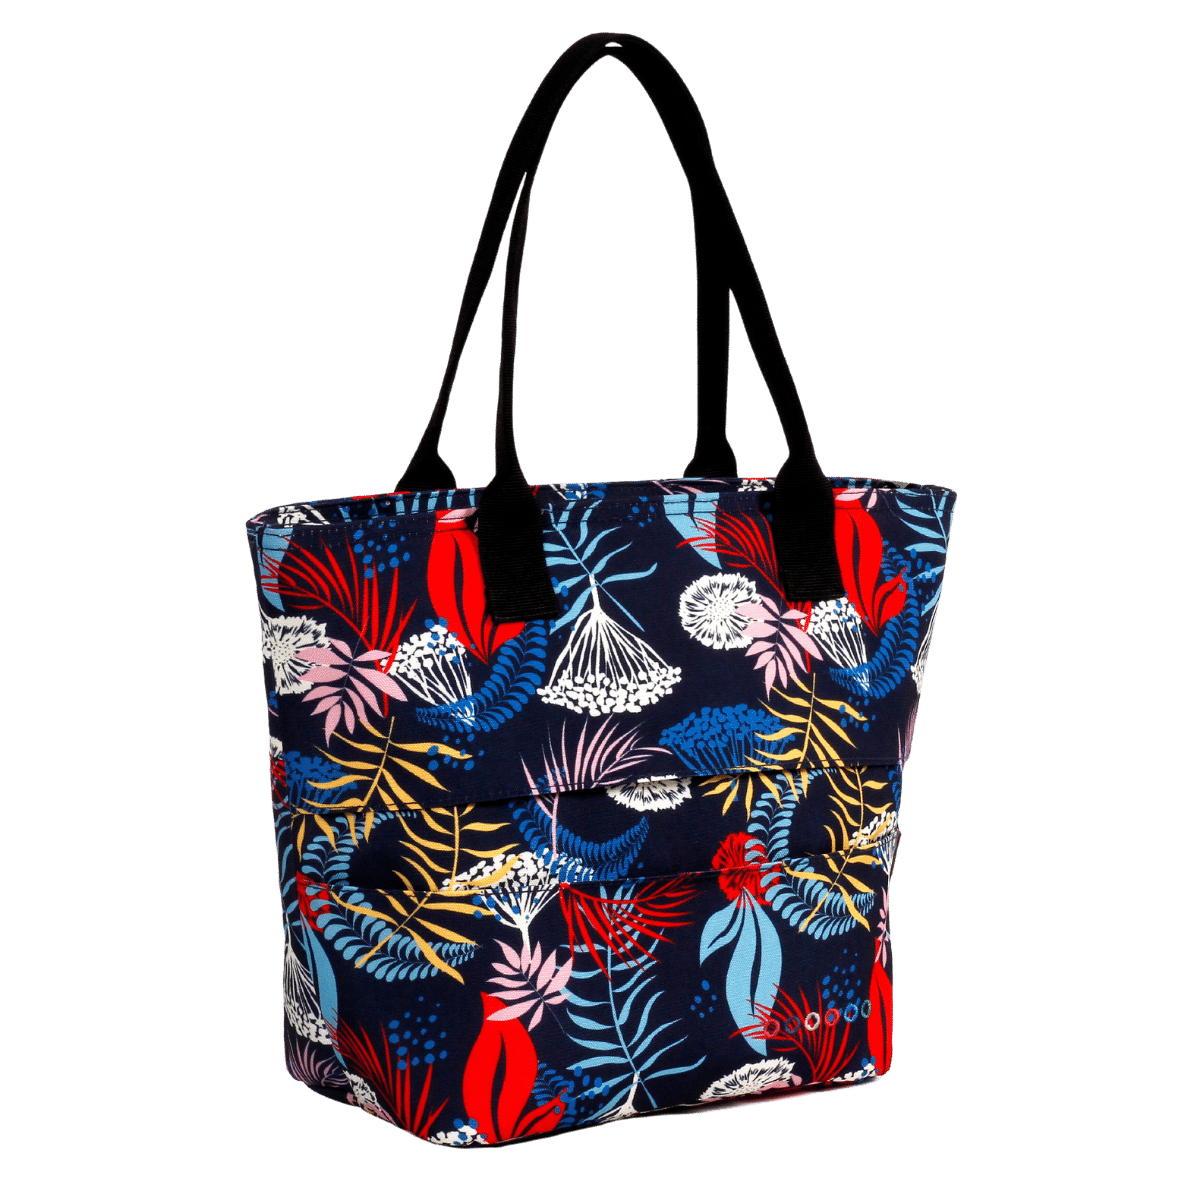 Lola Insulated Lunch Tote Bag - On Sale - JWorldstore